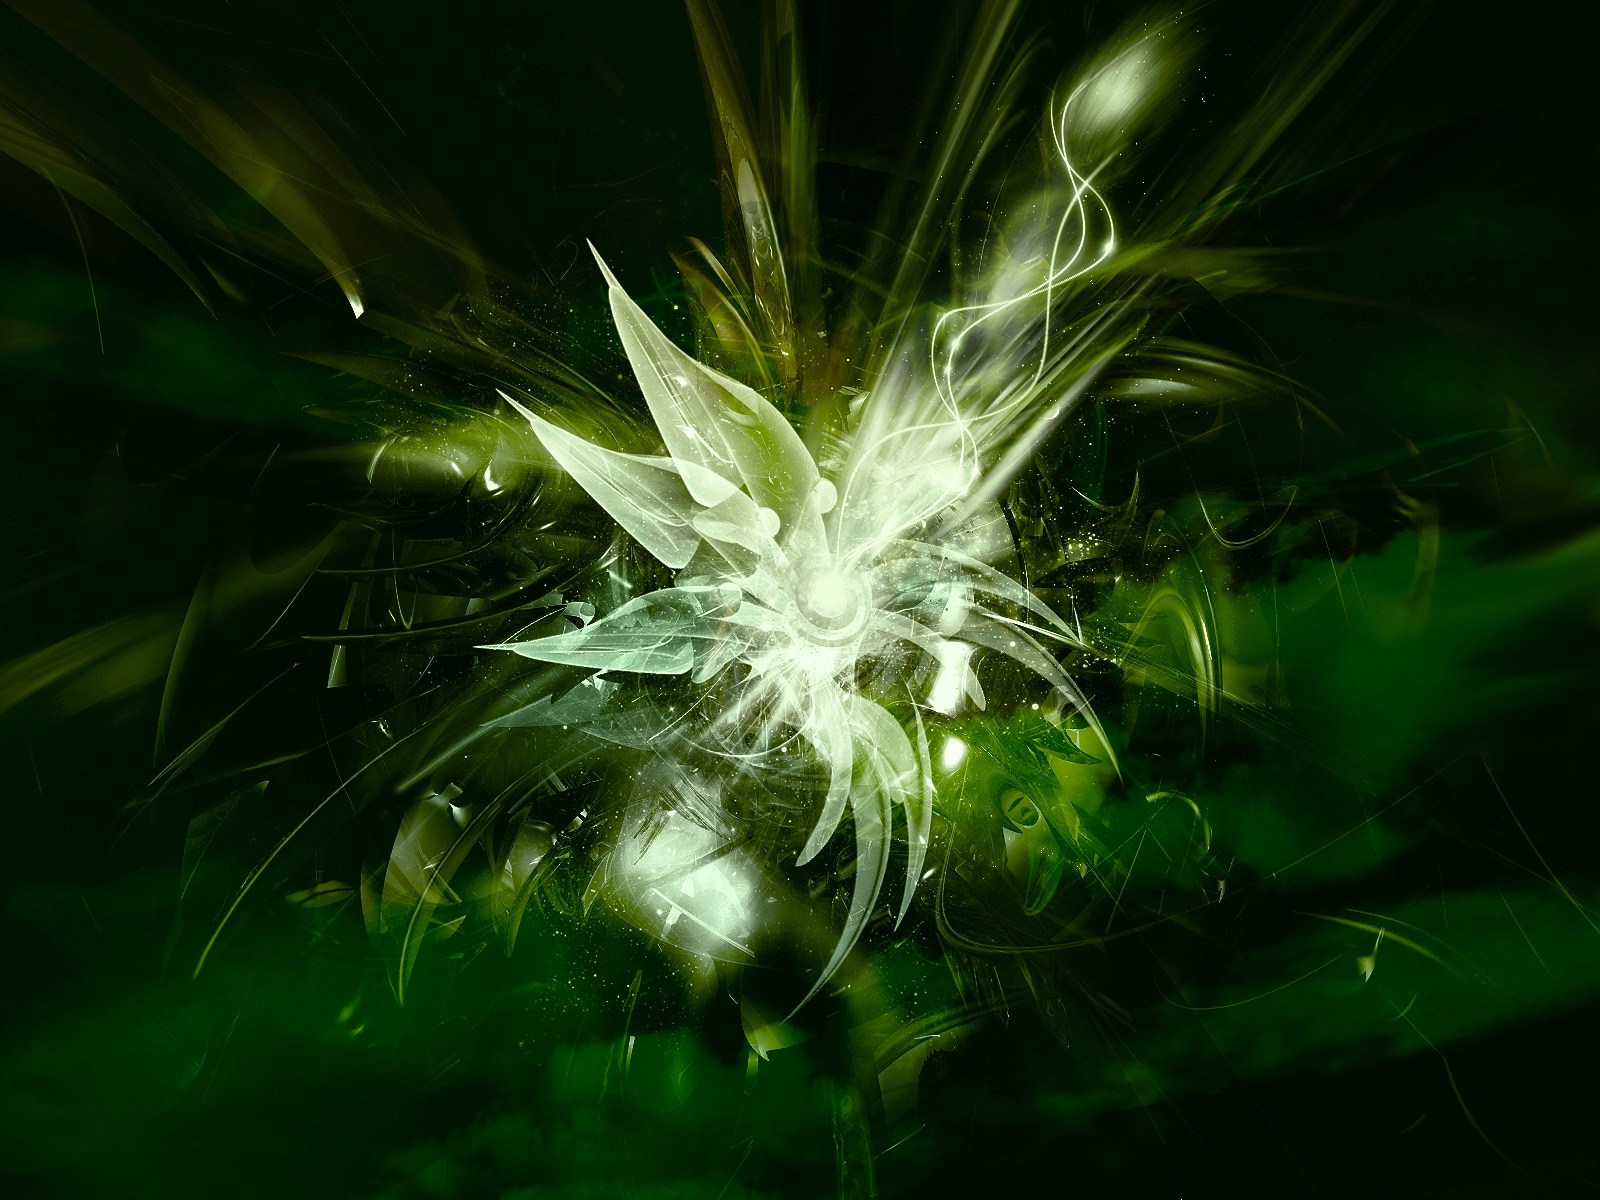 Widescreen image green, abstract